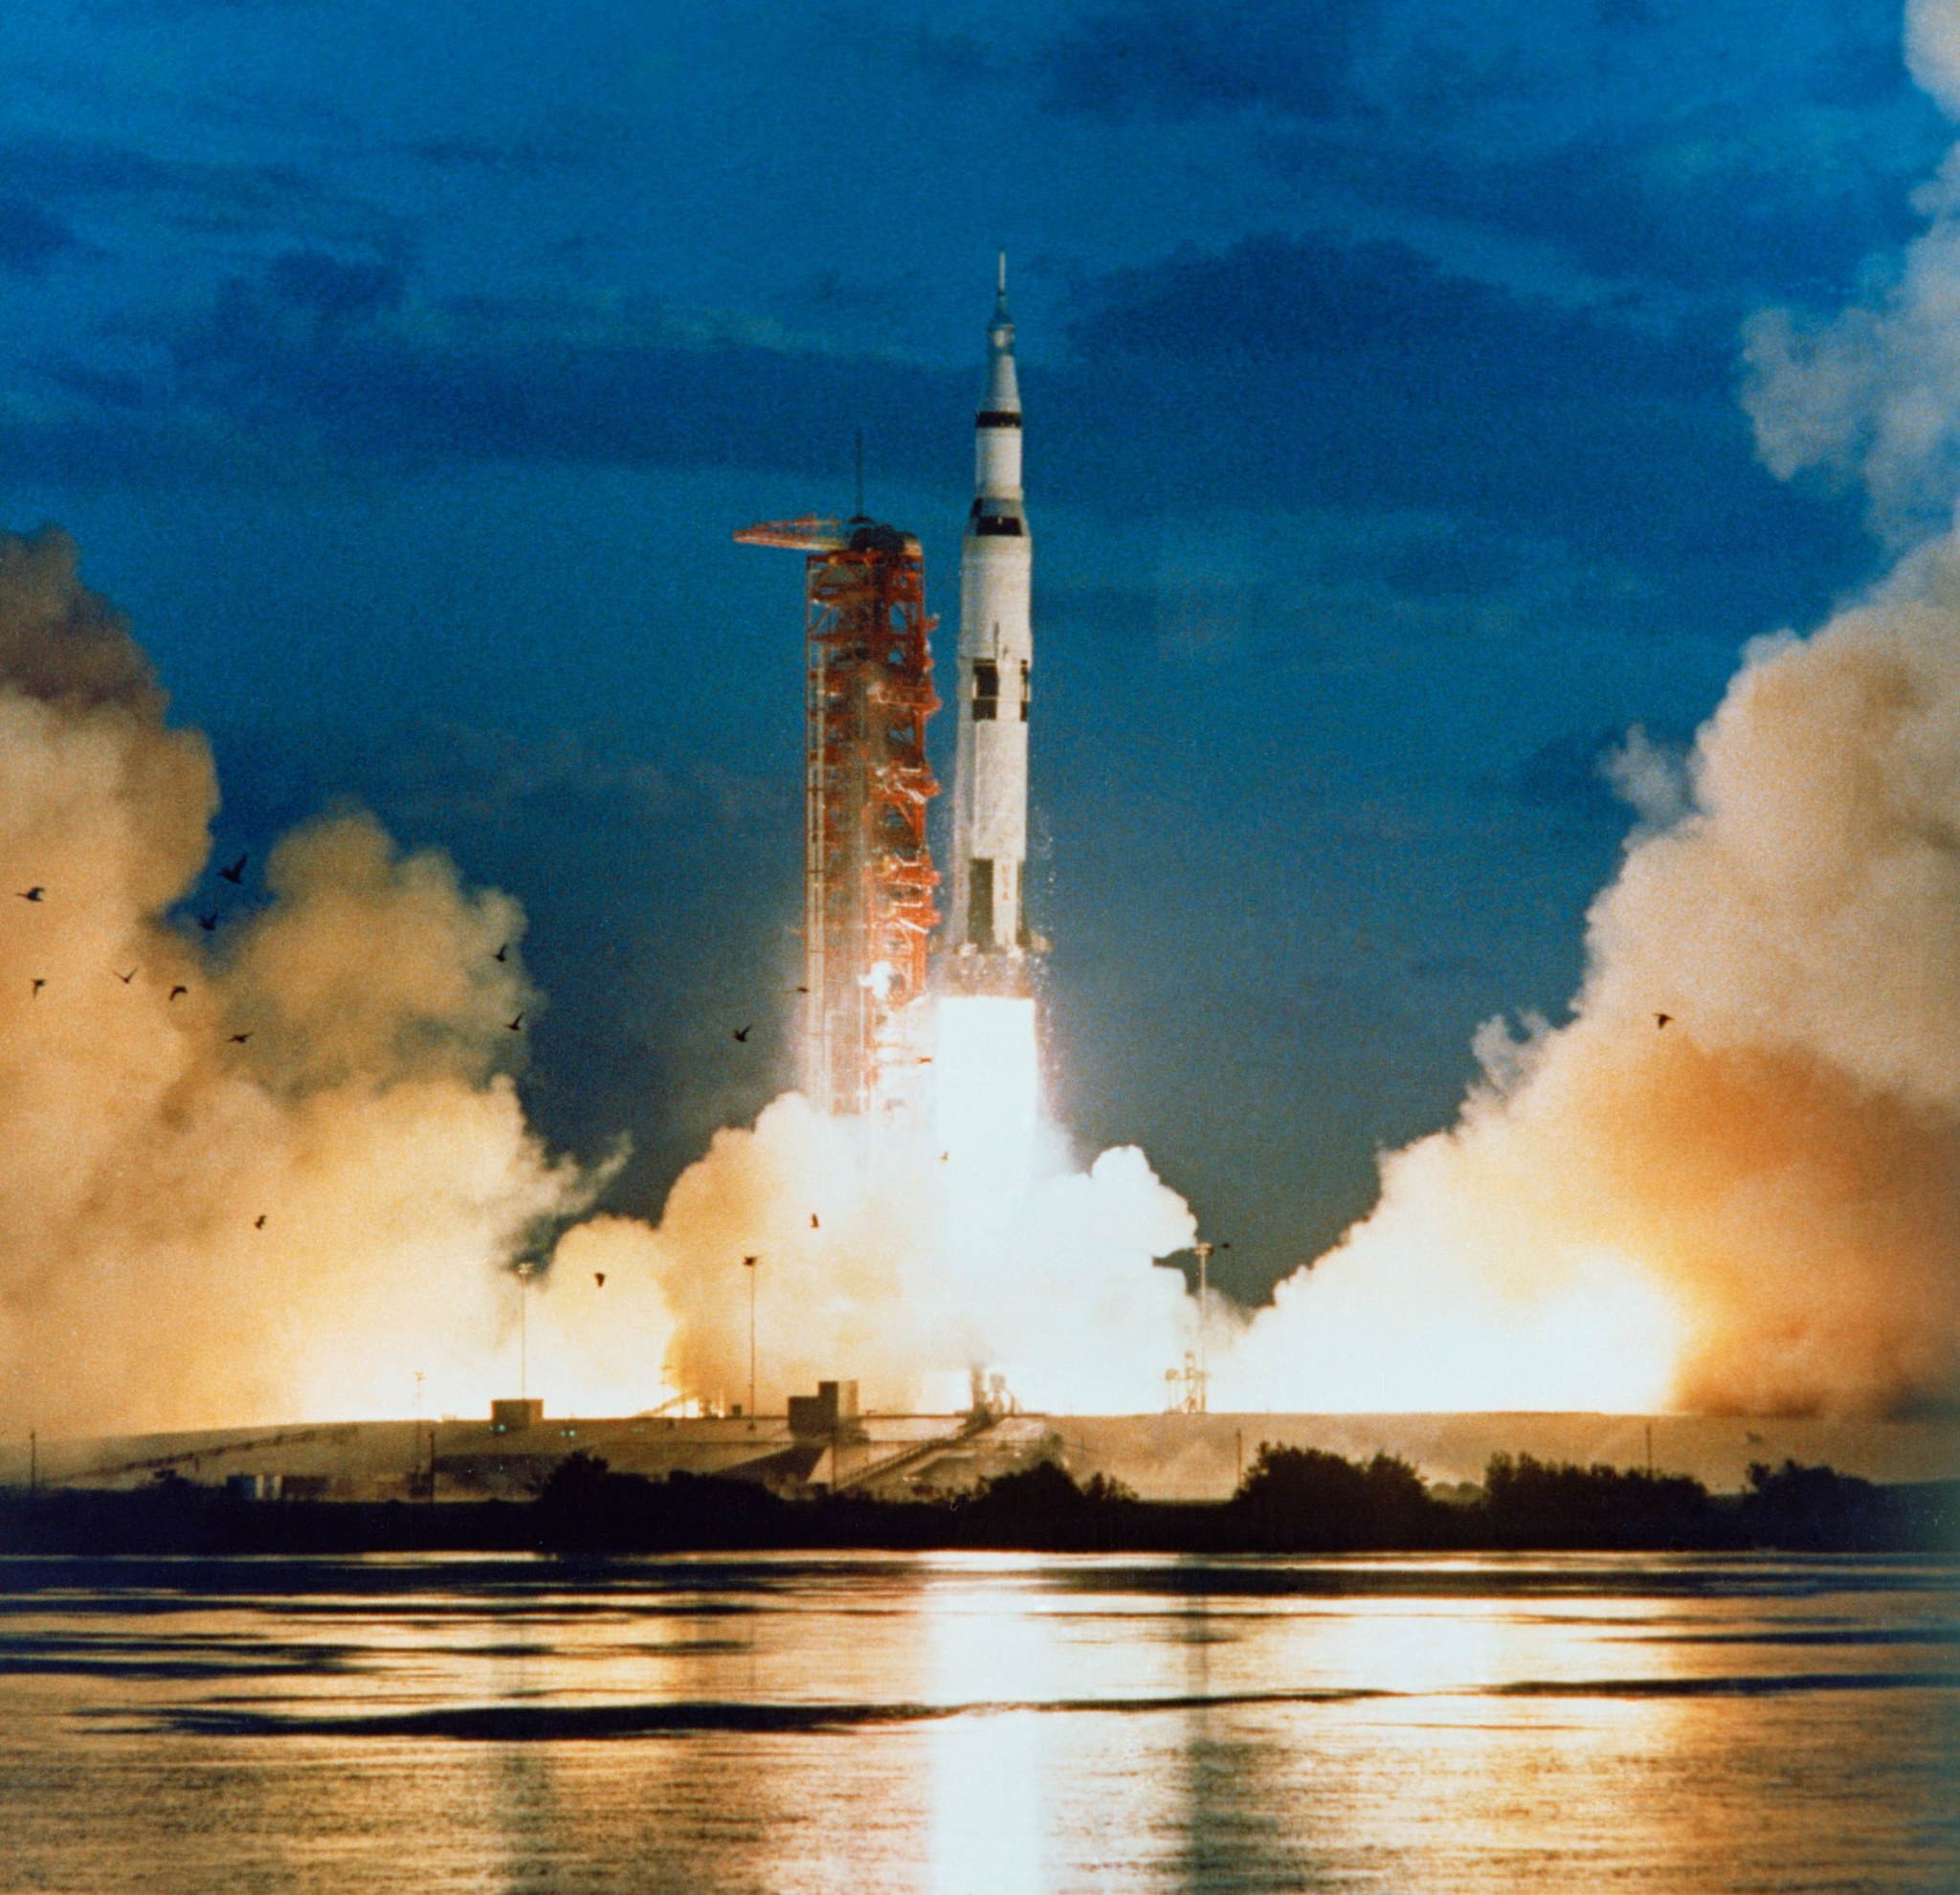 The Apollo 4 launch lifting off from Kennedy Space Center in Florida.